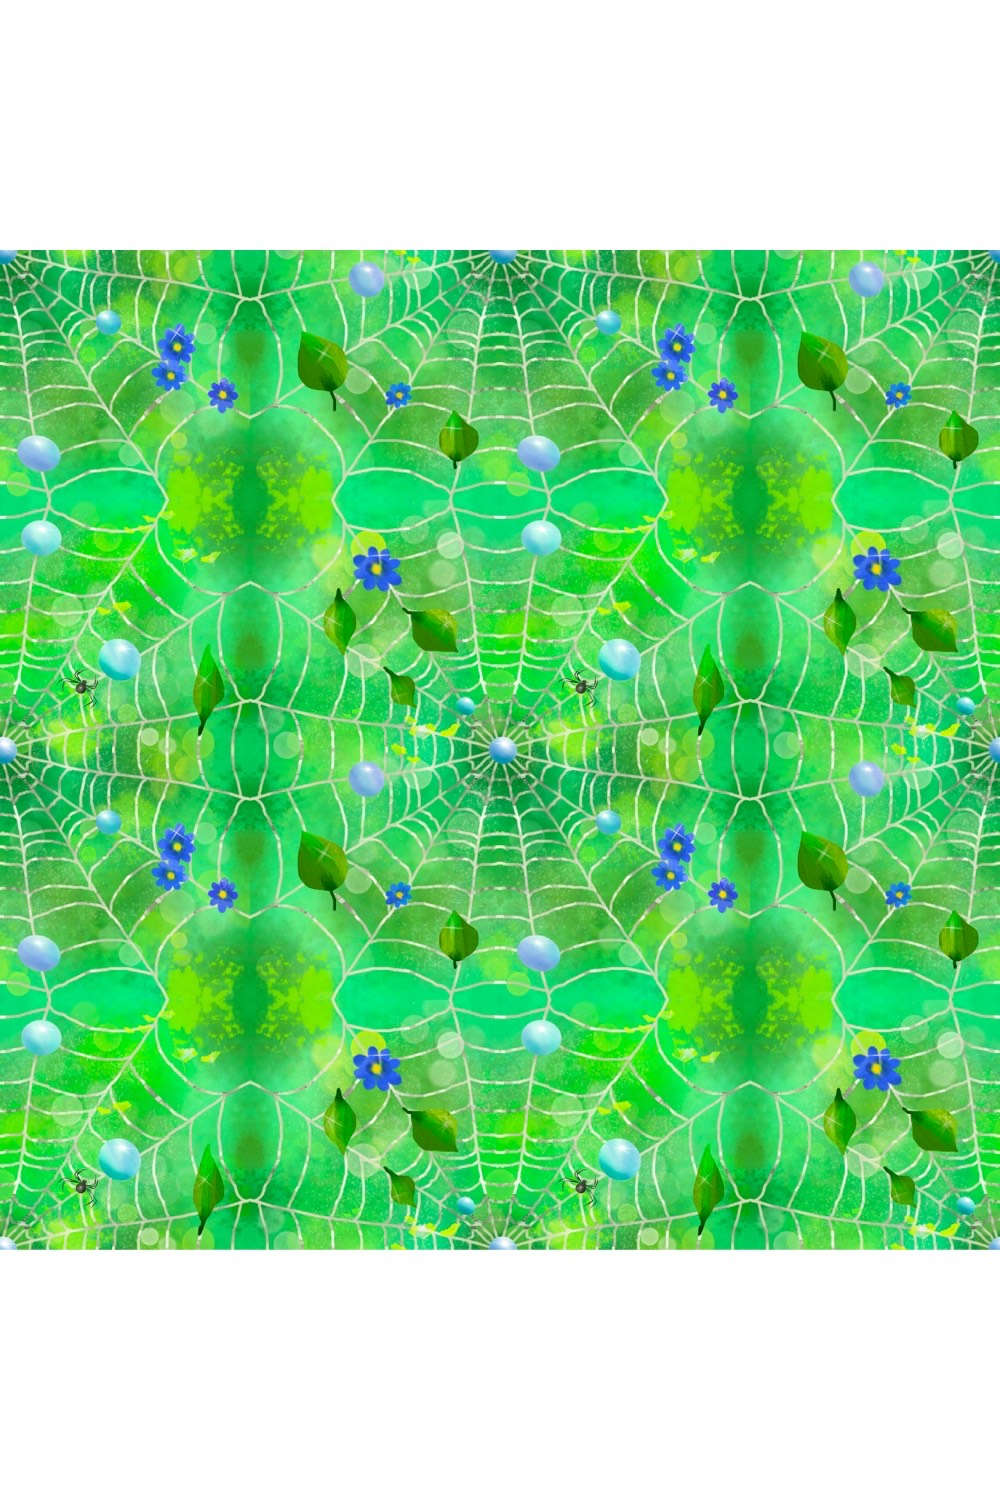 Pattern Web in the forest pinterest preview image.